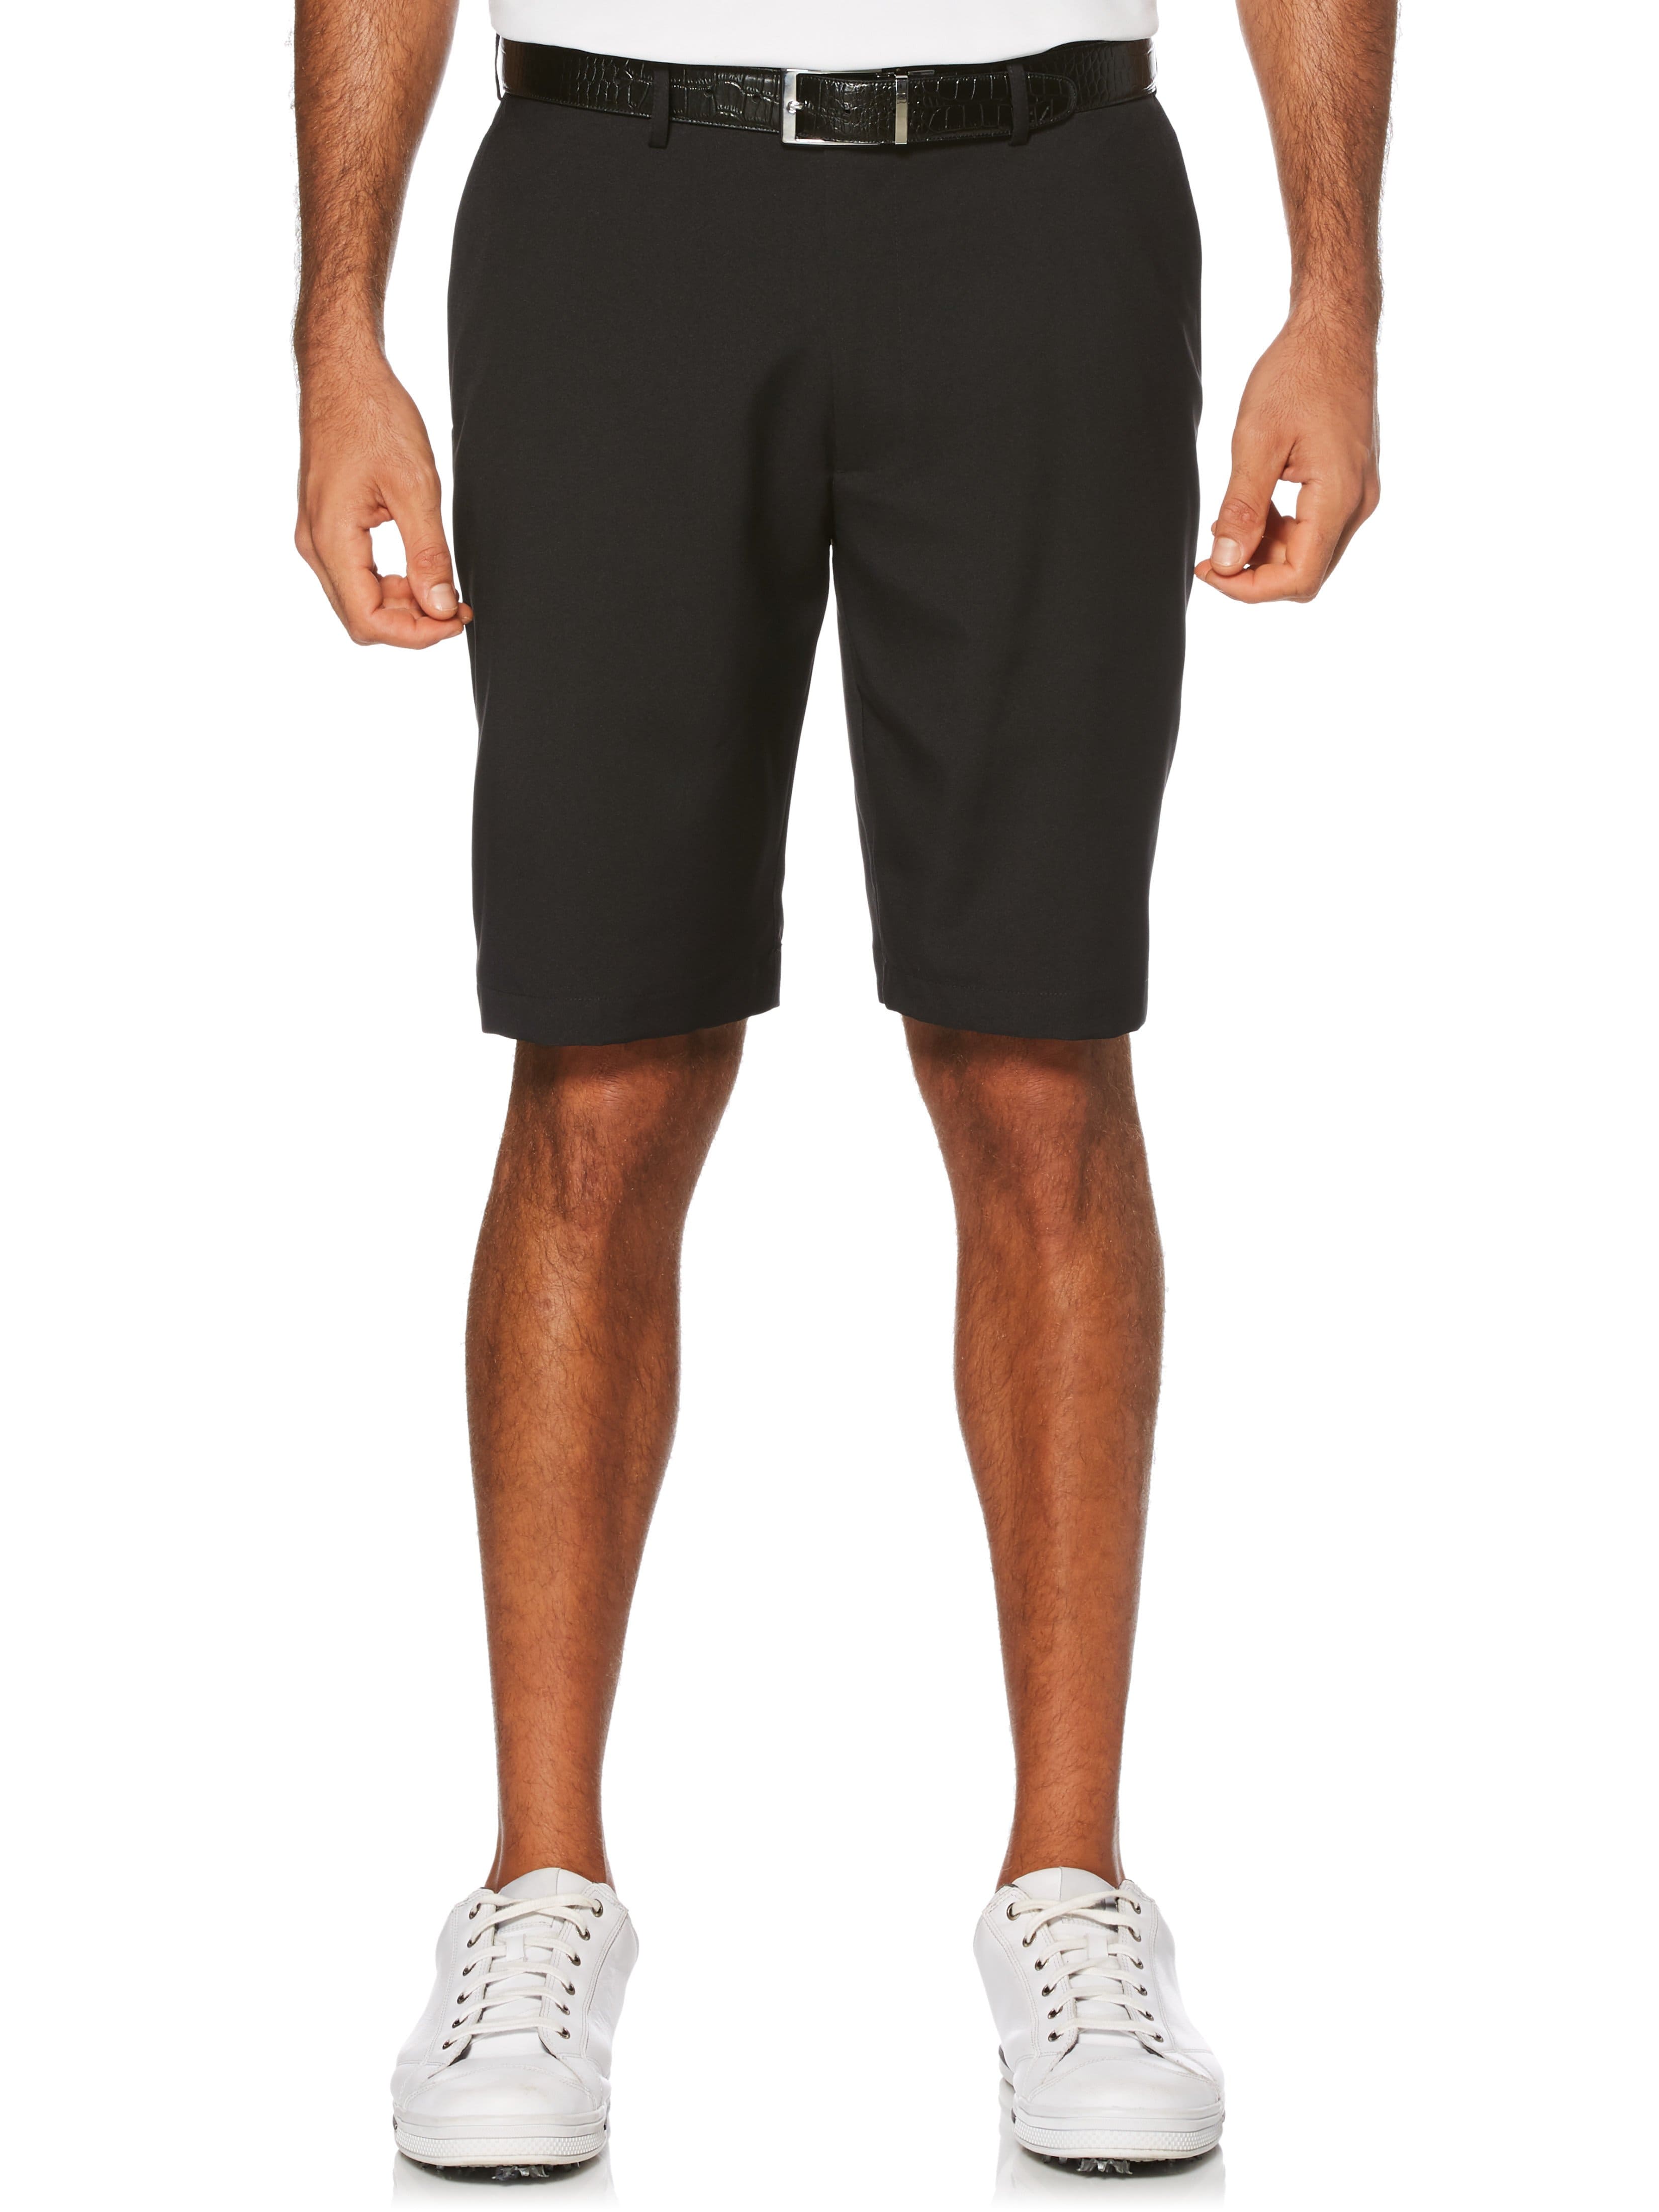 Under Armour Drive Tapered Golf Shorts - Bauhaus Blue - Andrew Morris Golf